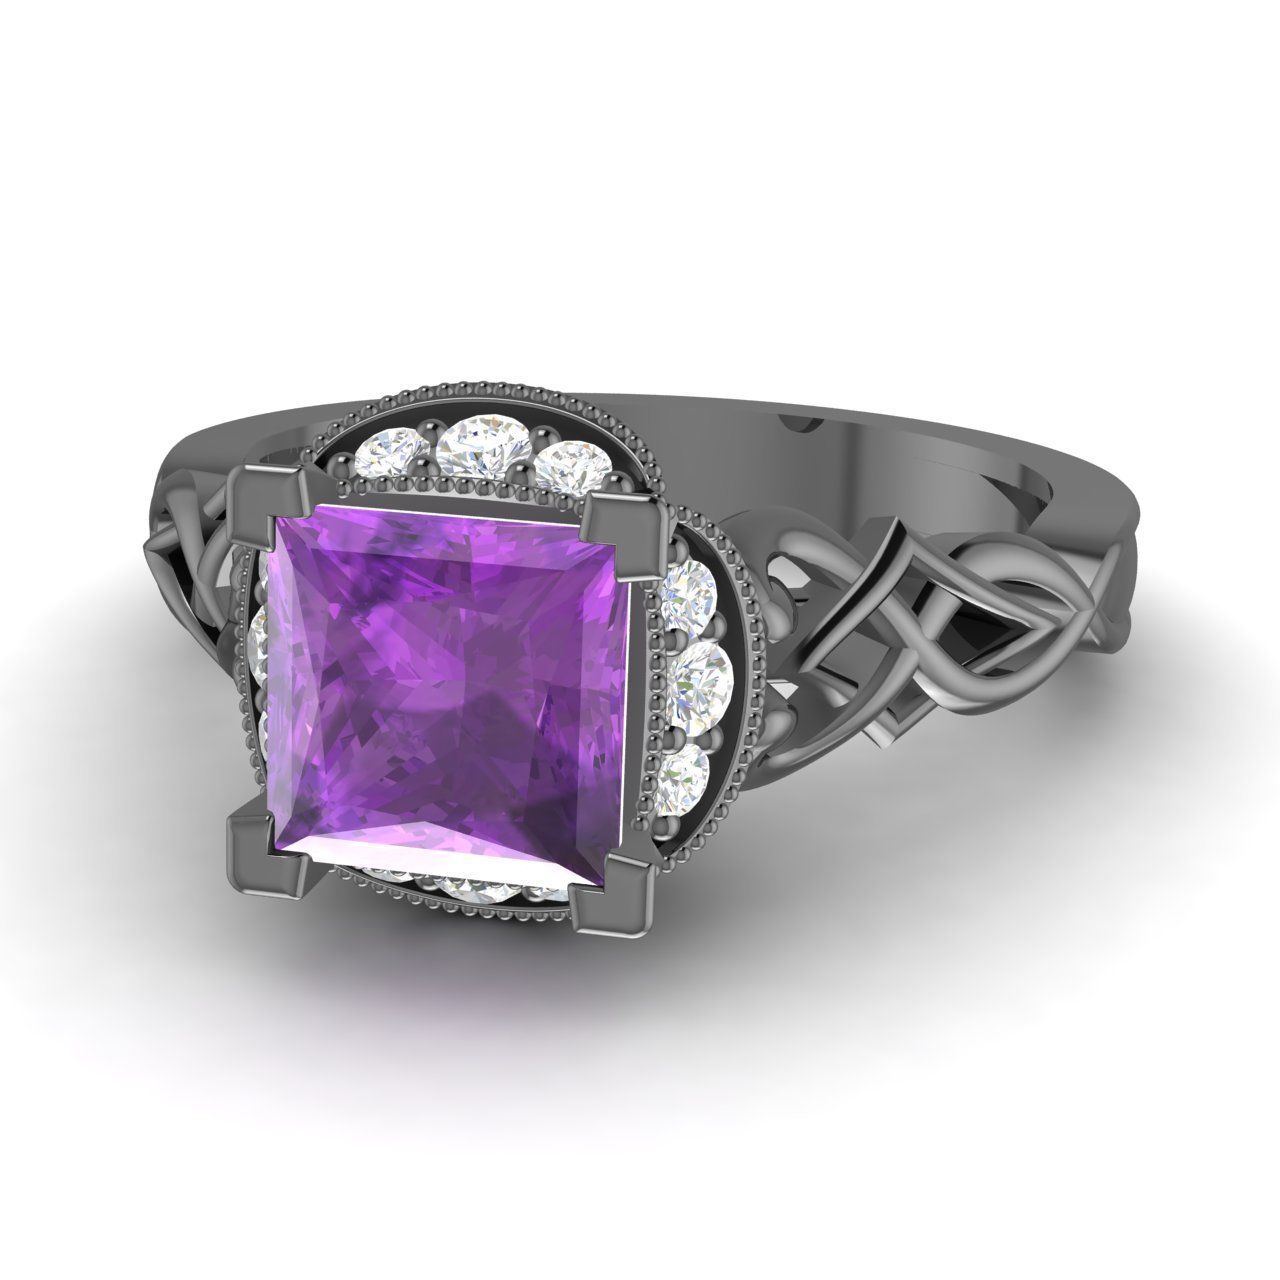 076 Ct Natural Amethyst And Si Diamond Engagement Ring In 14k Black Gold